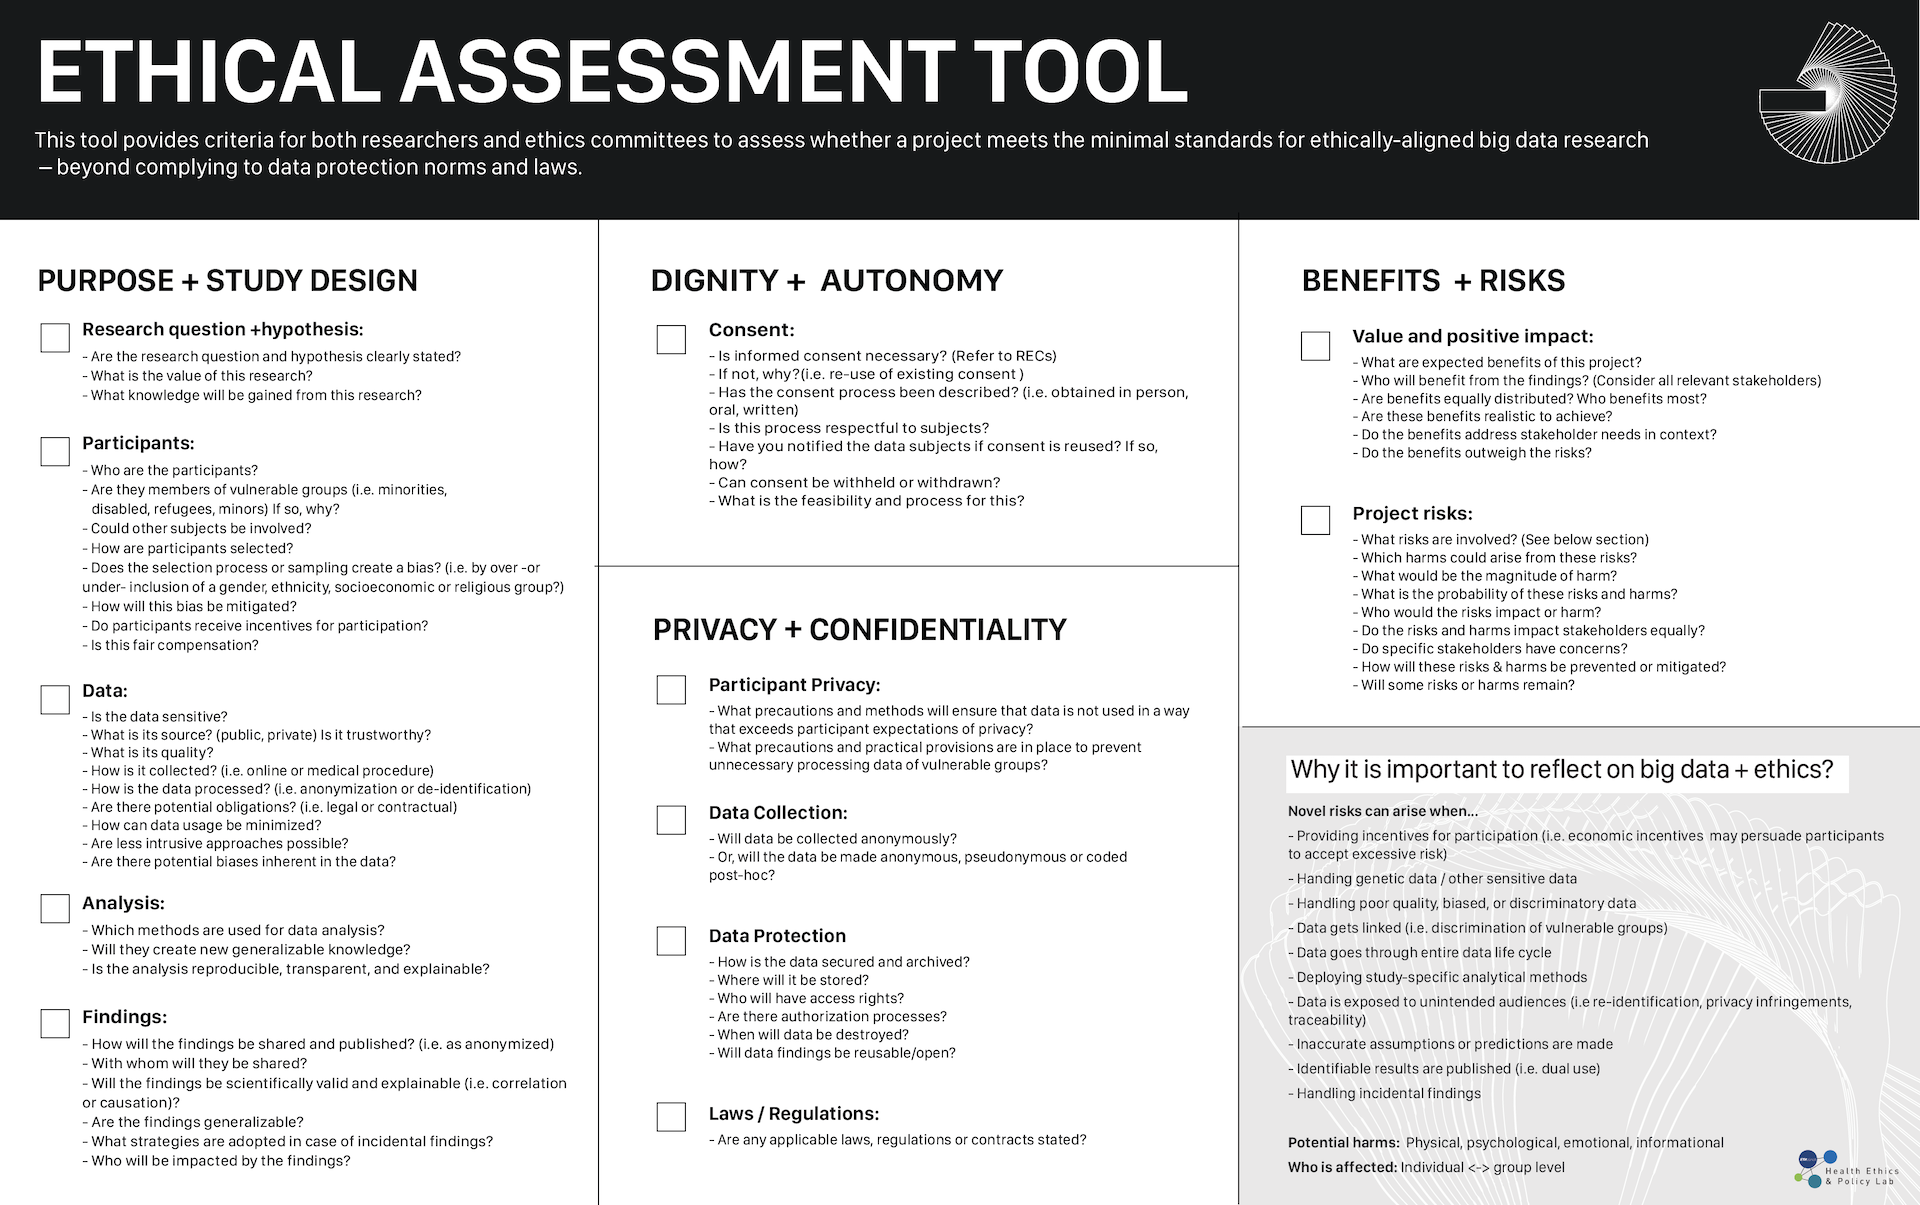 Enlarged view: Ethical Assessment Tool